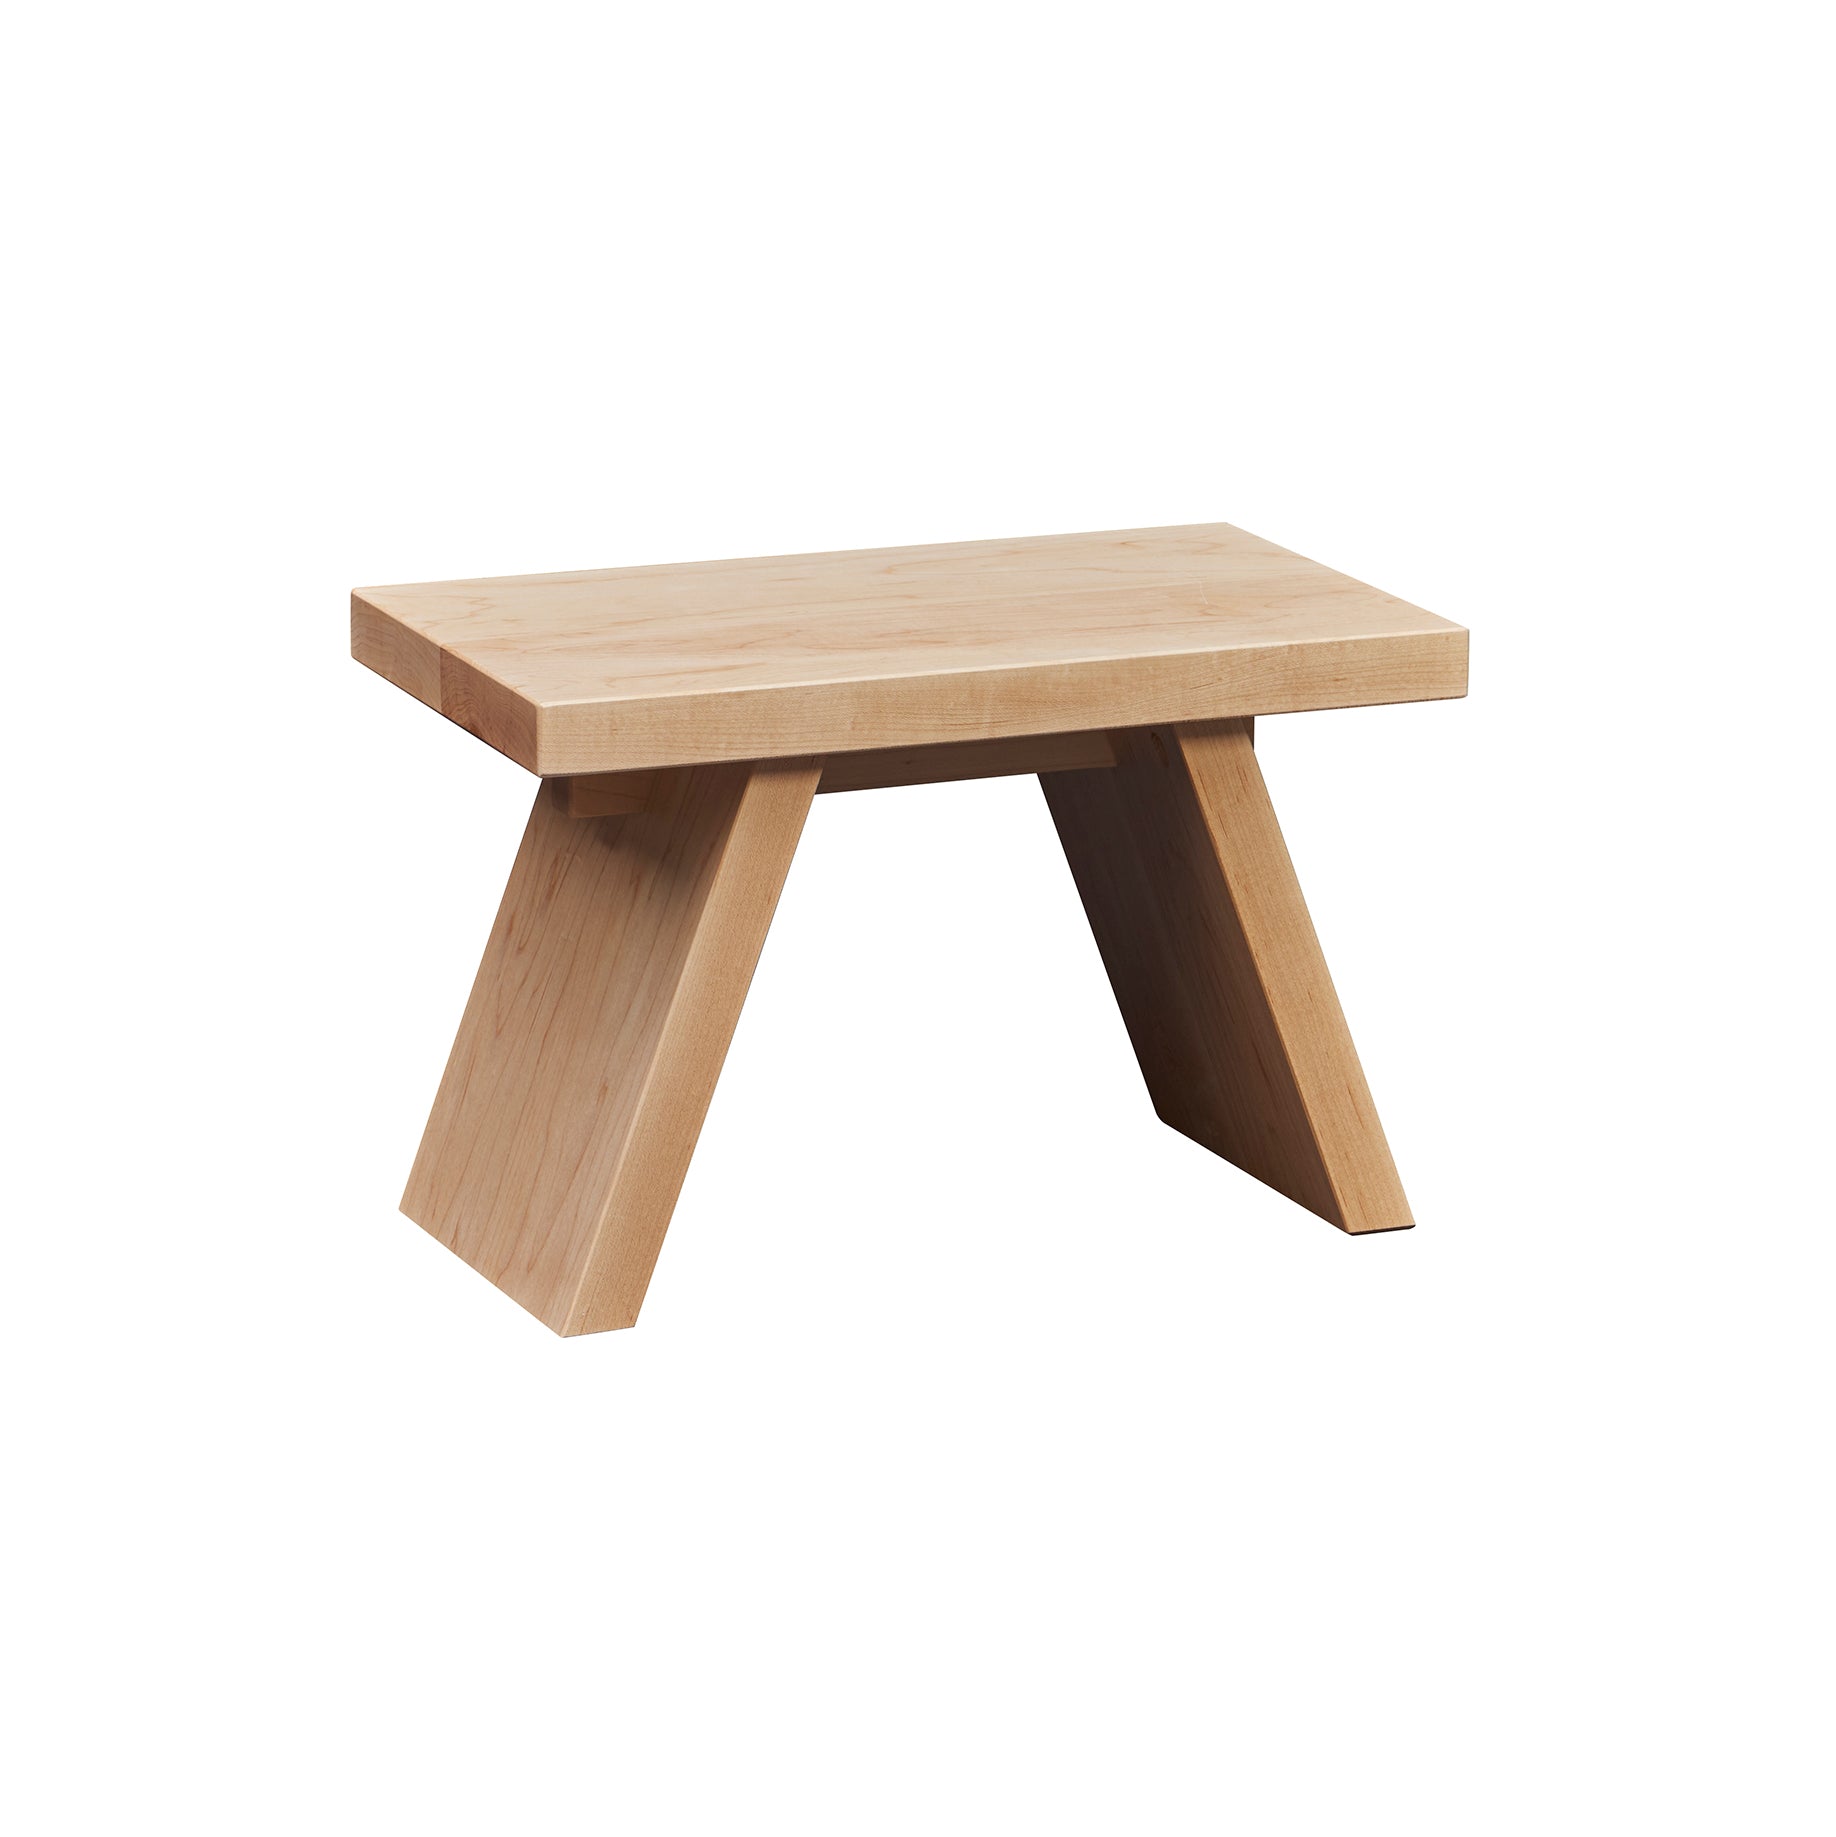 Solid maple wood step stool with angled legs.